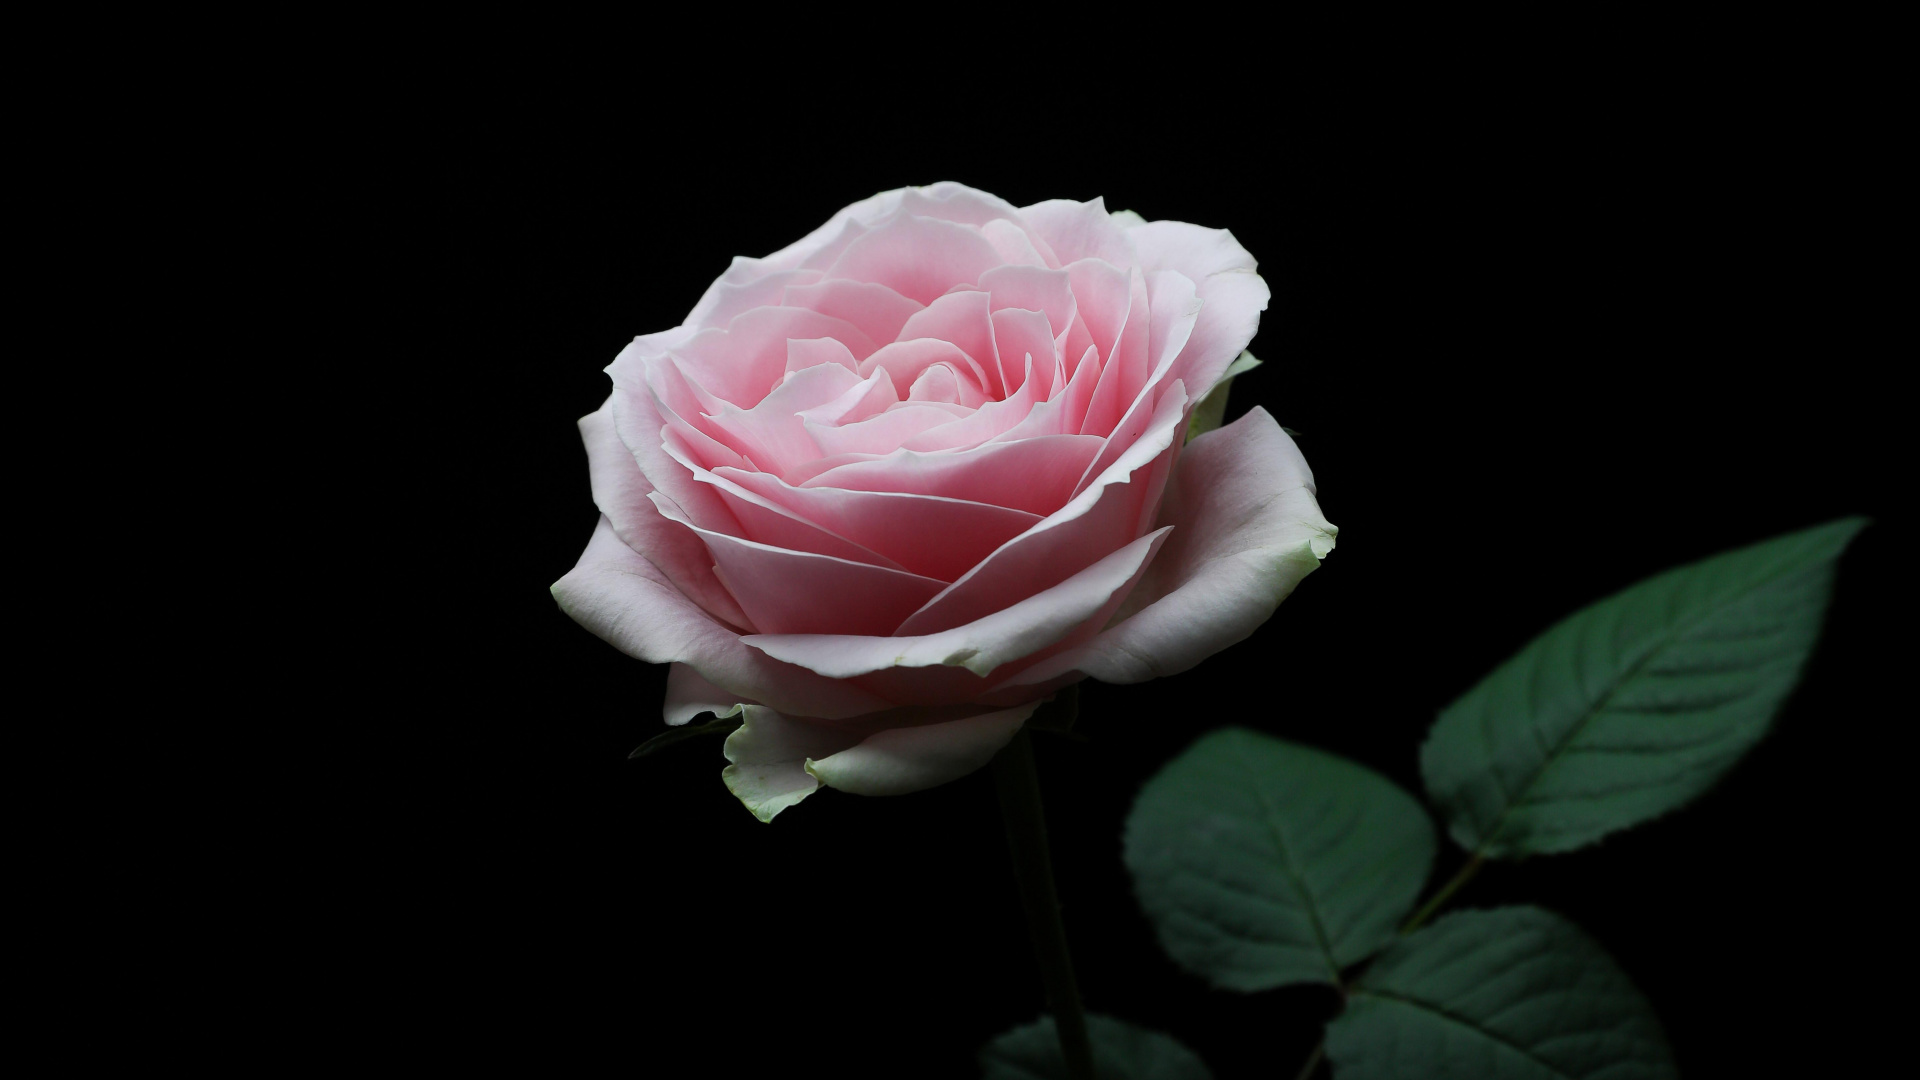 Pink Rose in Bloom With Black Background. Wallpaper in 1920x1080 Resolution